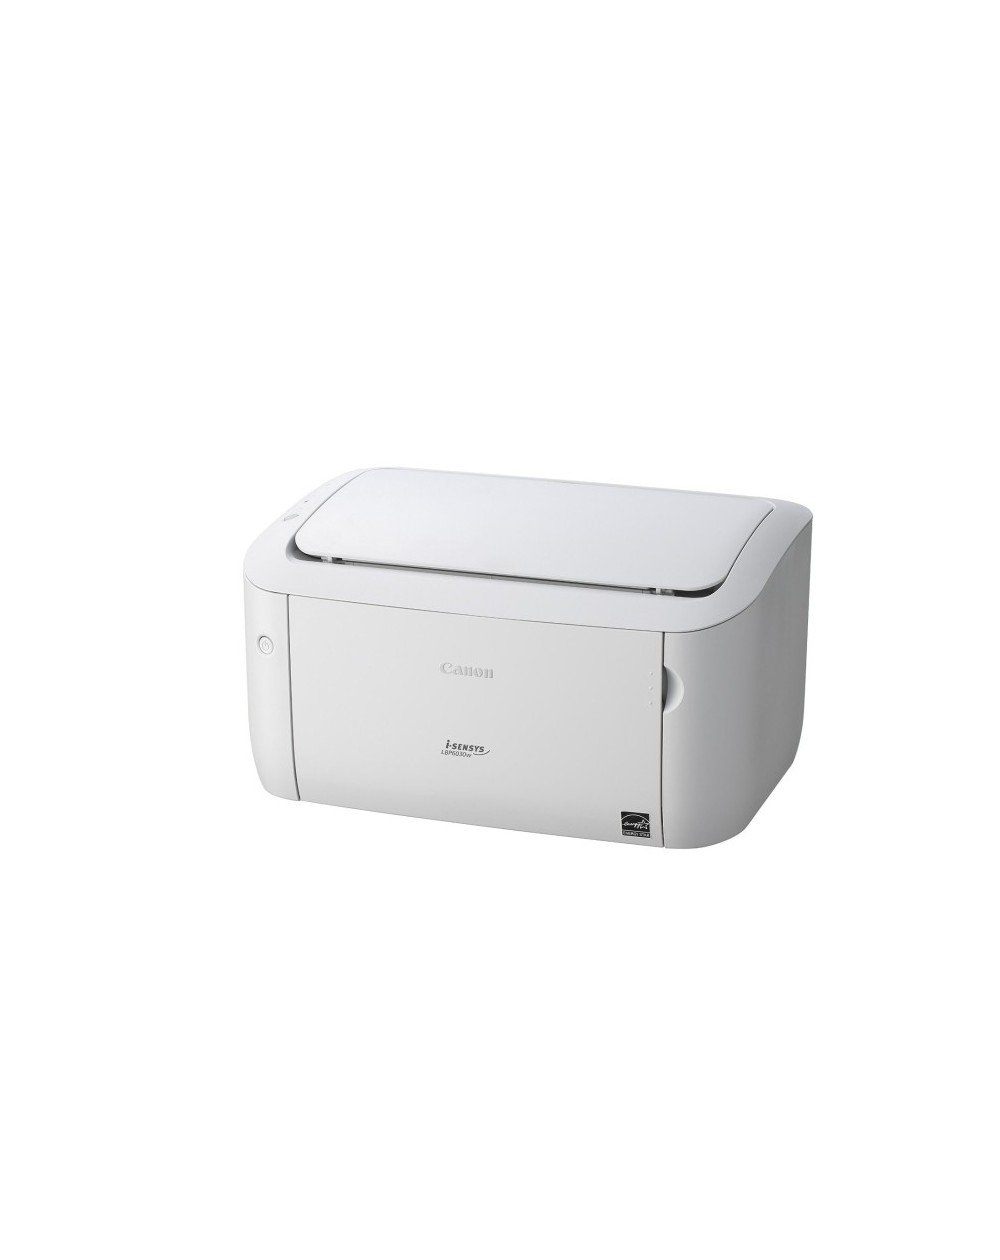 Imprimante A3 Multifonction Laser Monochrome Canon imageRUNNER 2425i  (4293C004AA)